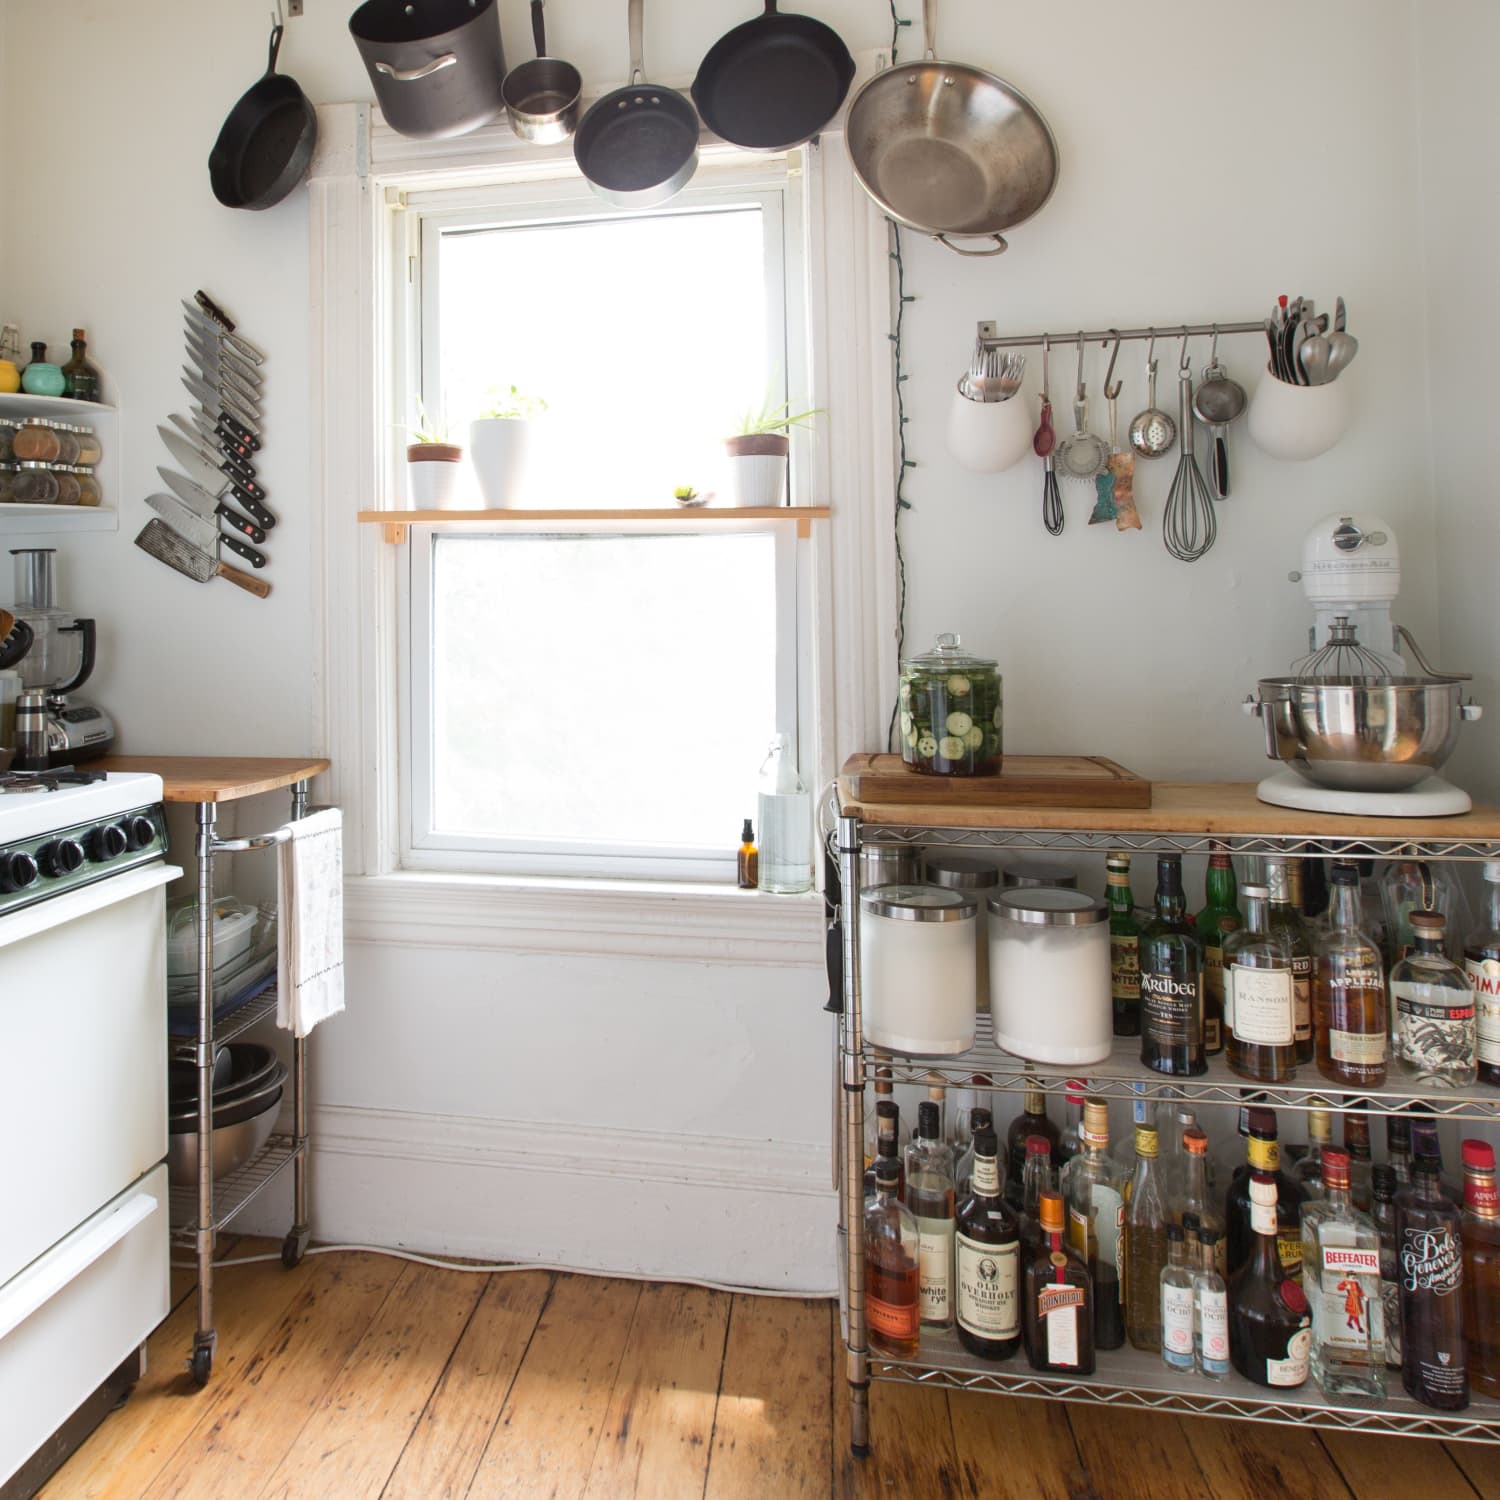 10 Things to Hang in Your Kitchen for Better Storage | Kitchn